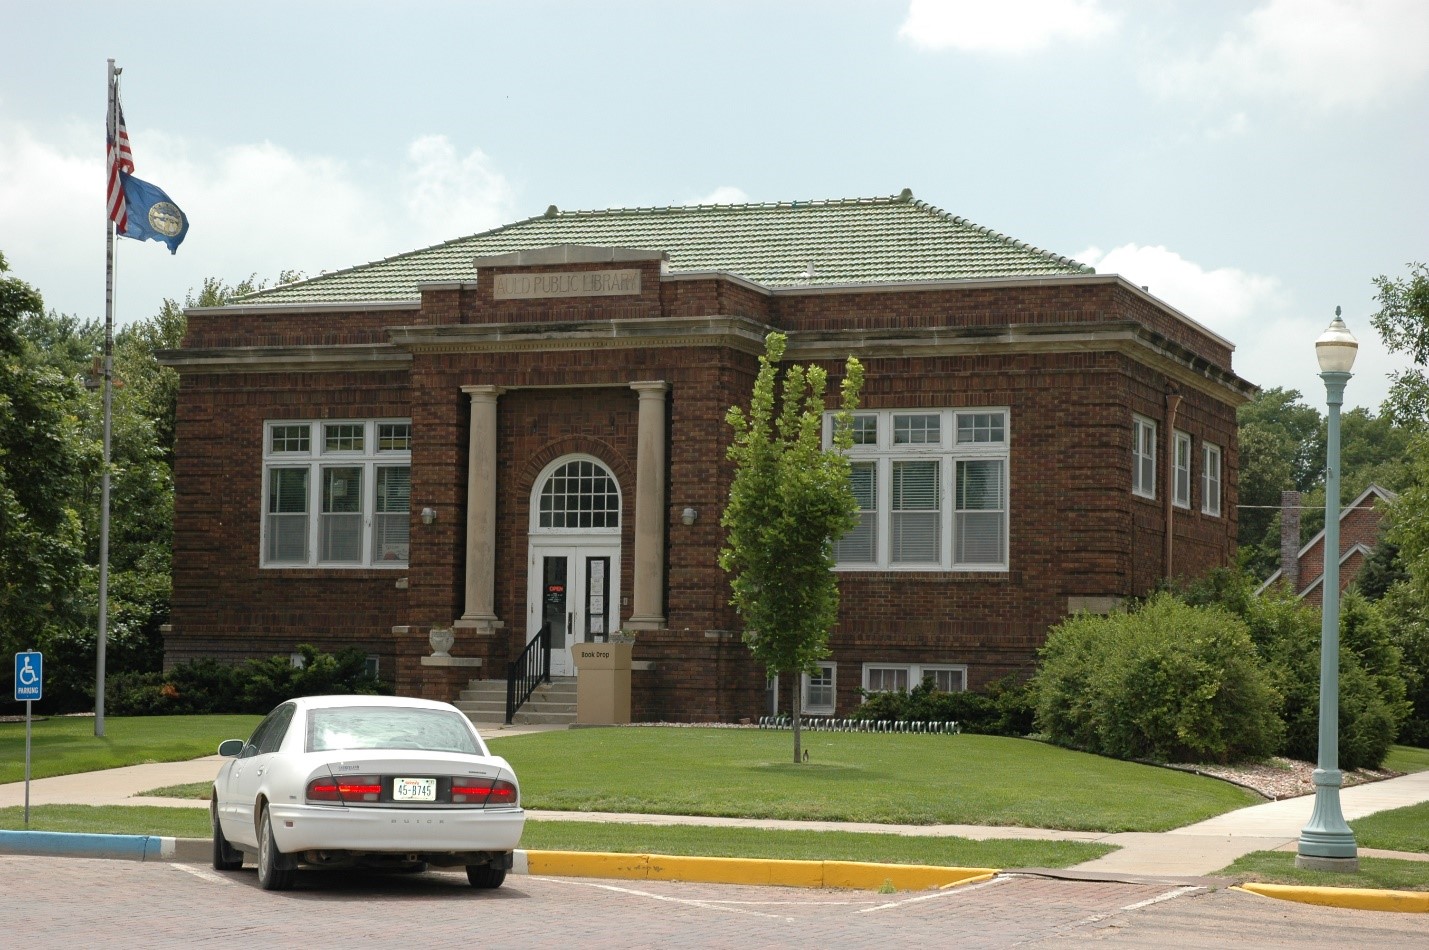 Auld Library, listed on the National Register in 1993